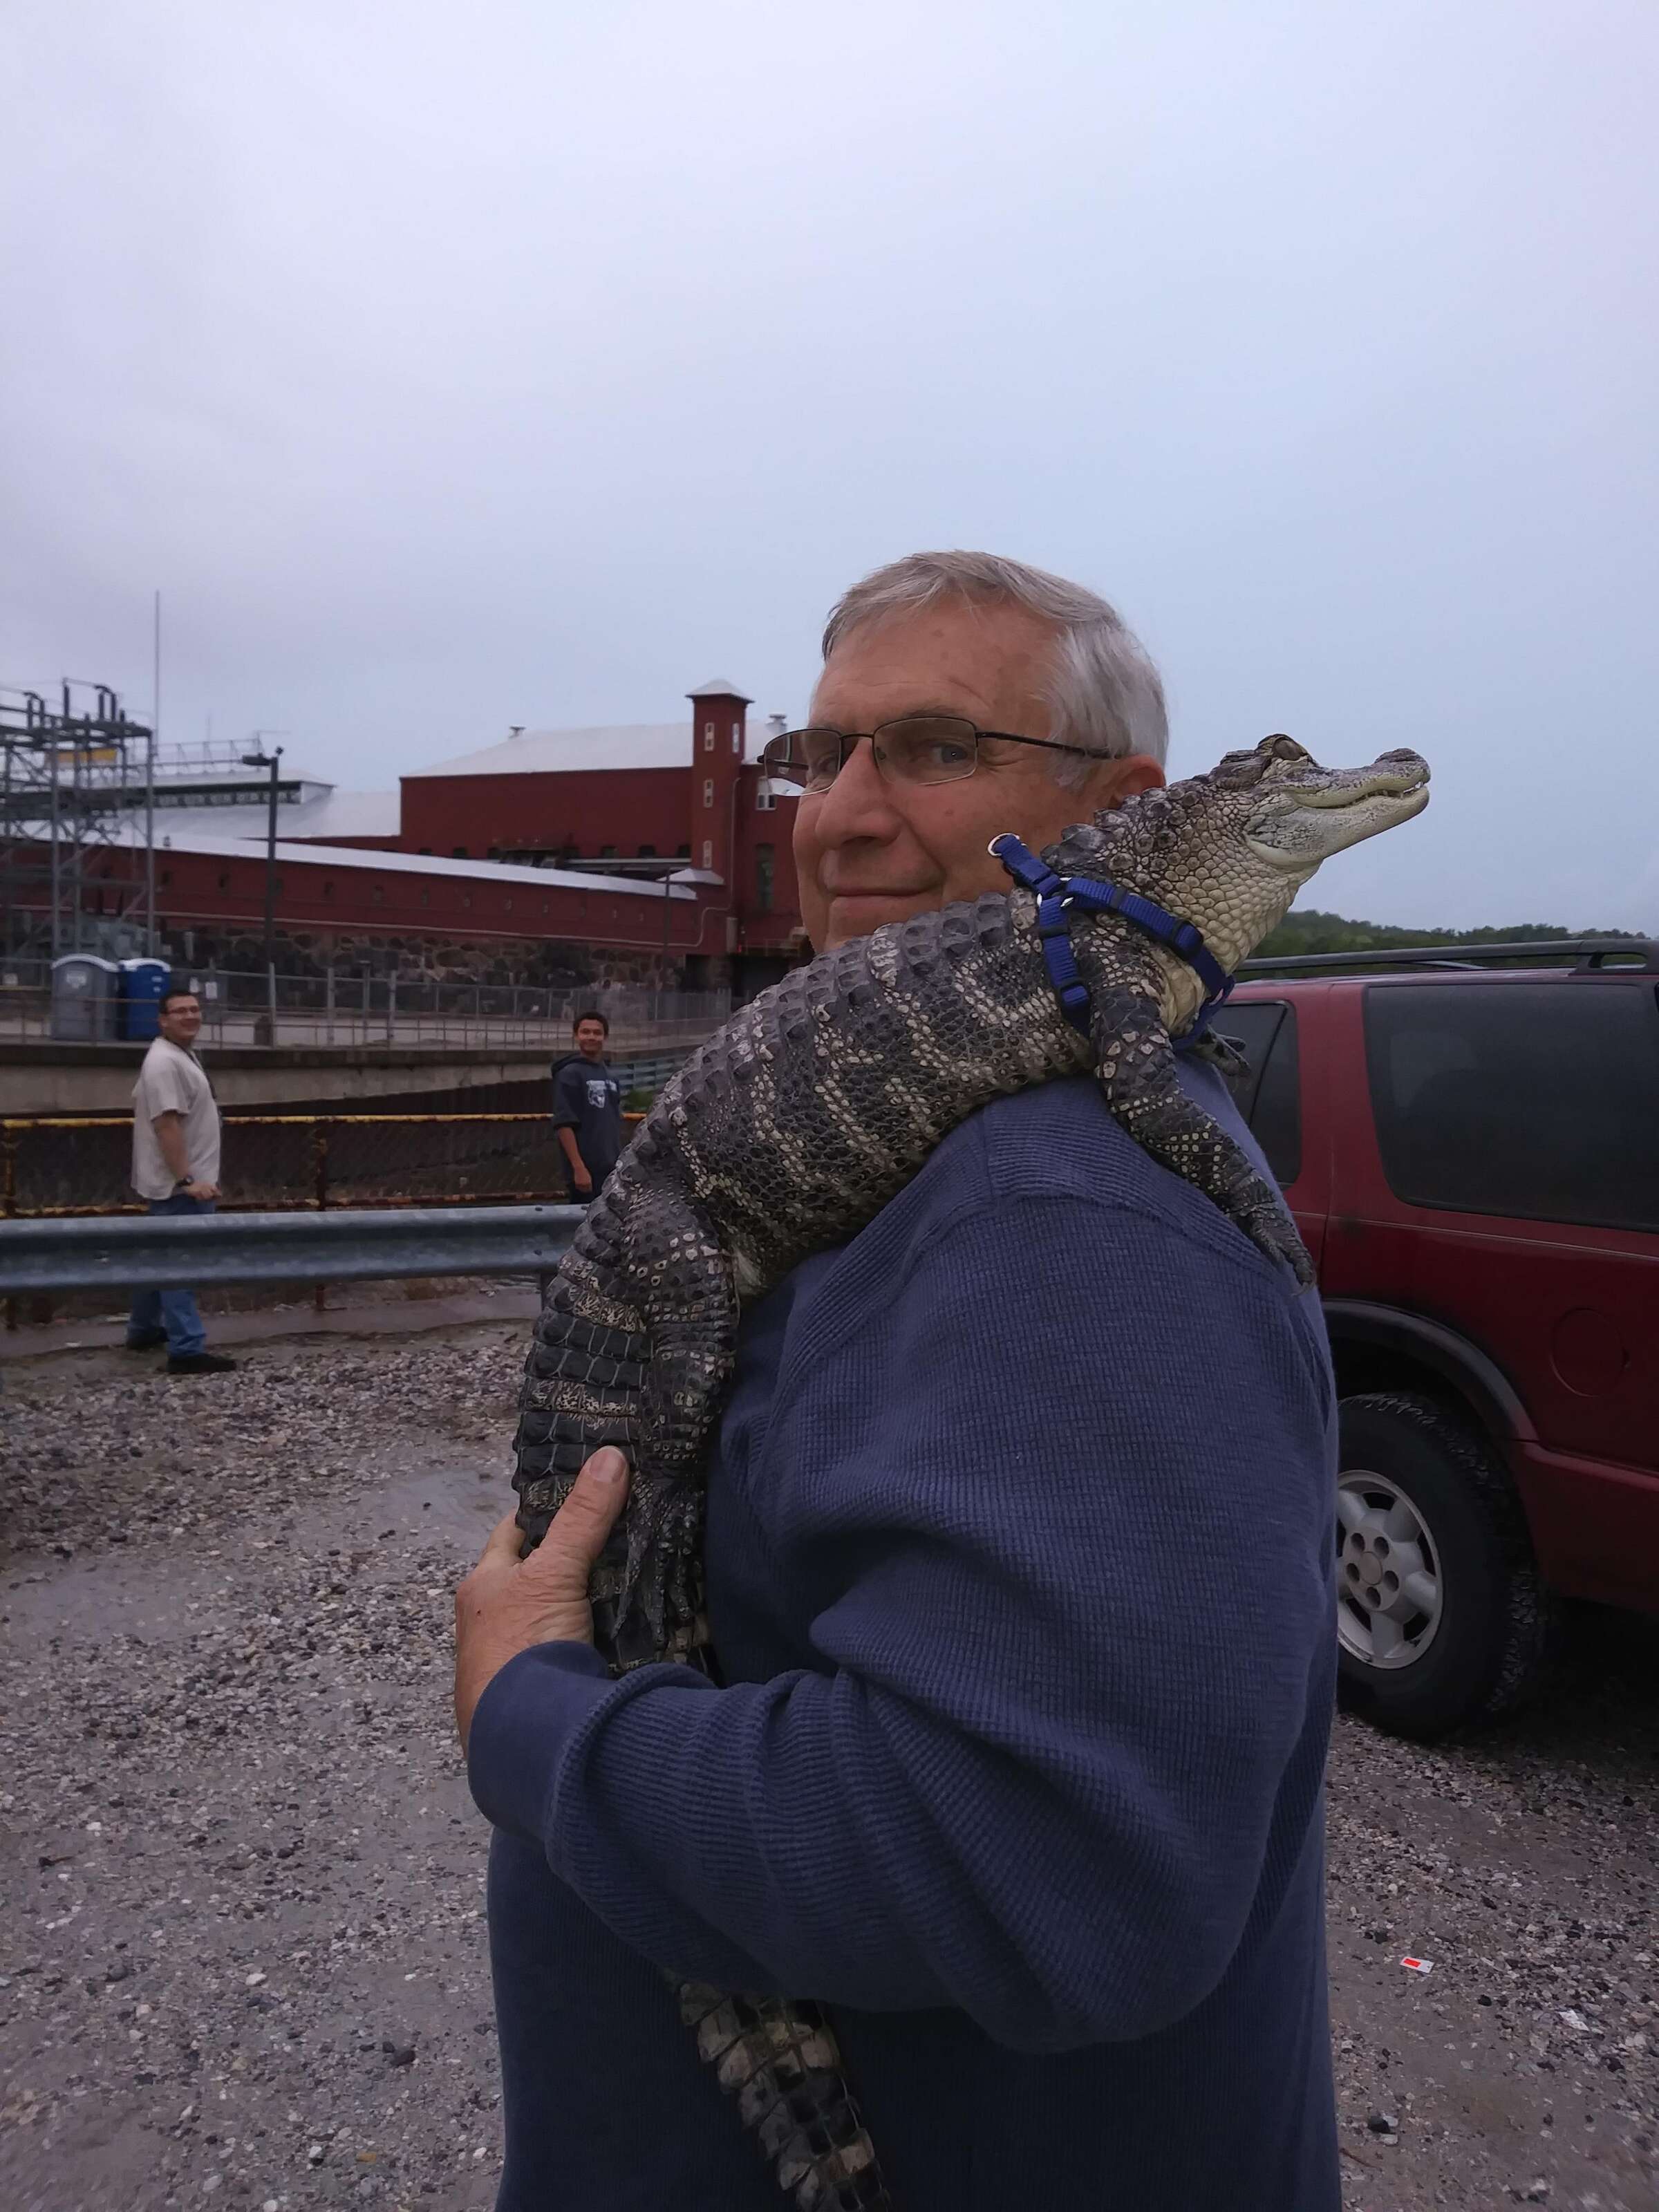 Pennsylvania man and his emotional support alligator who helps him with depression